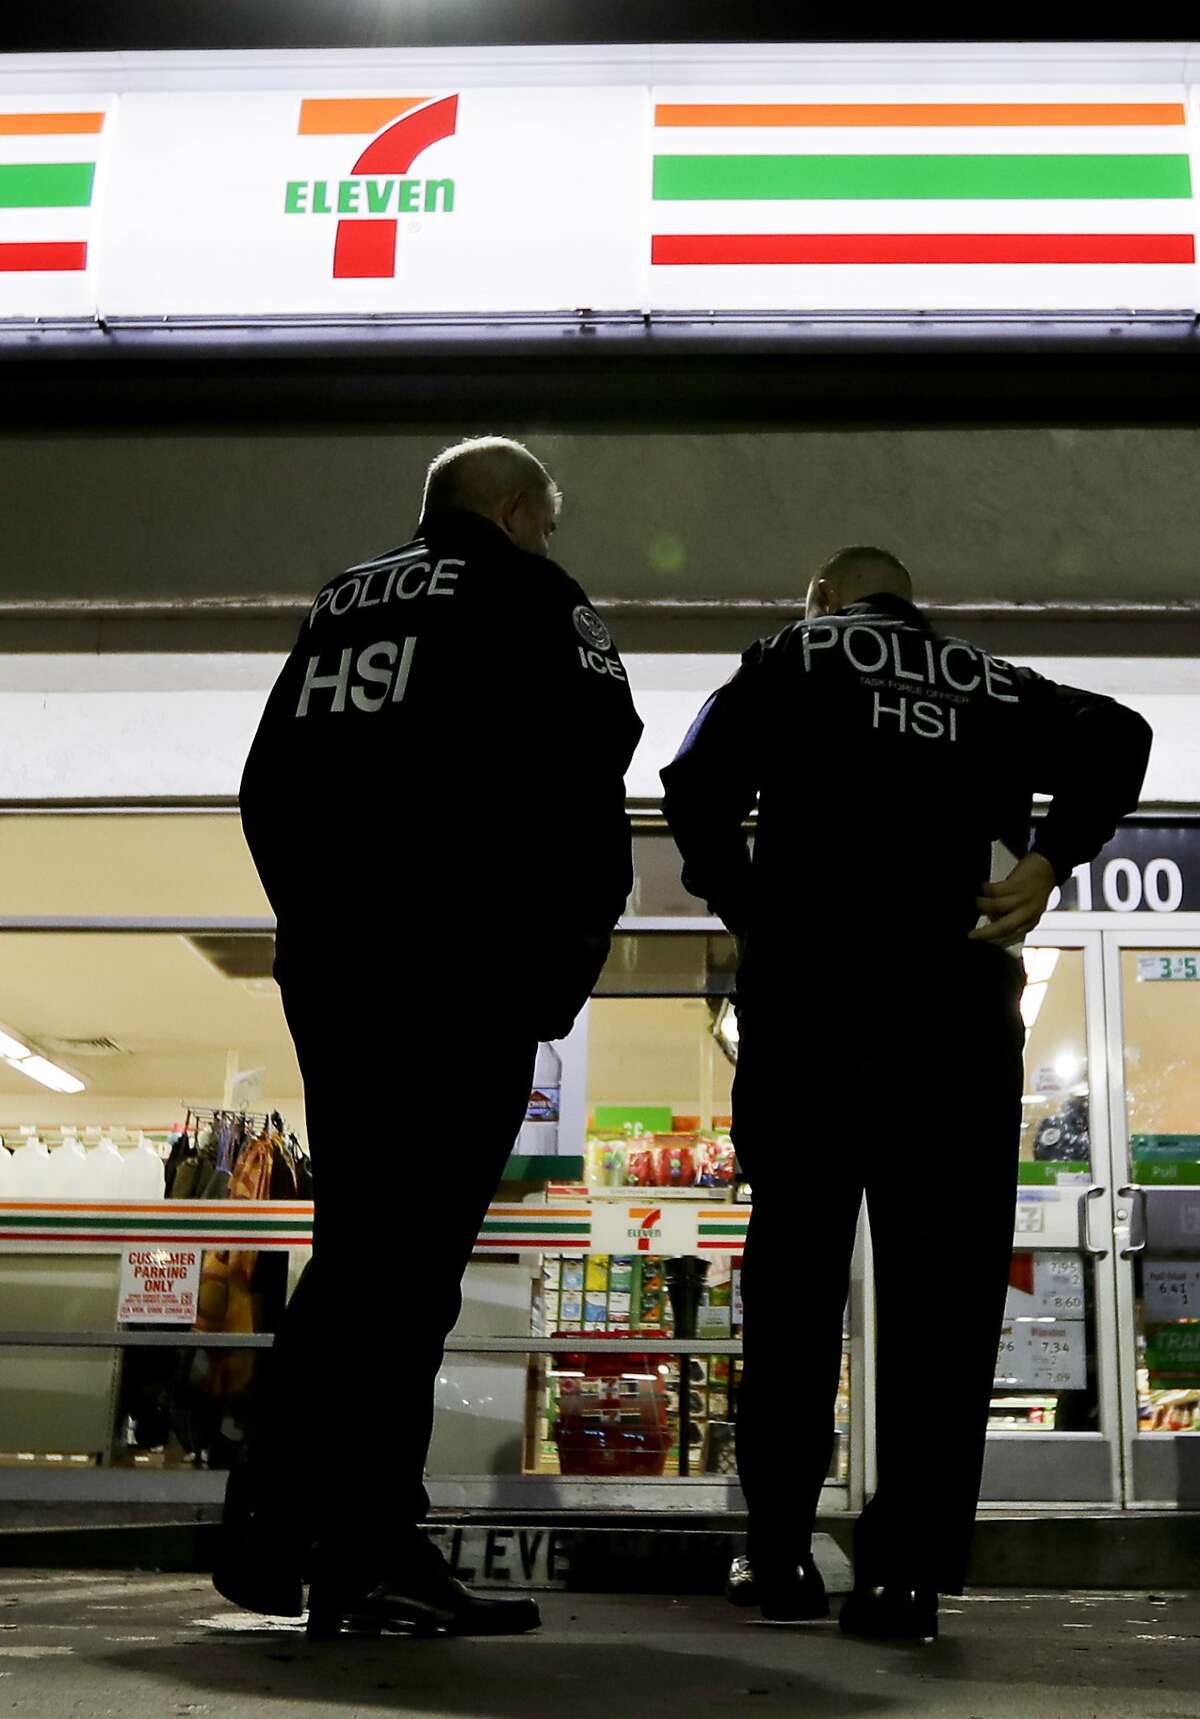 U.S. Immigration and Customs Enforcement agents serve an employment audit notice at a 7-Eleven convenience store Wednesday, Jan. 10, 2018 in Los Angeles. Agents said they targeted about 100 7-Eleven stores nationwide Wednesday to open employment audits and interview workers. (AP Photo/Chris Carlson)